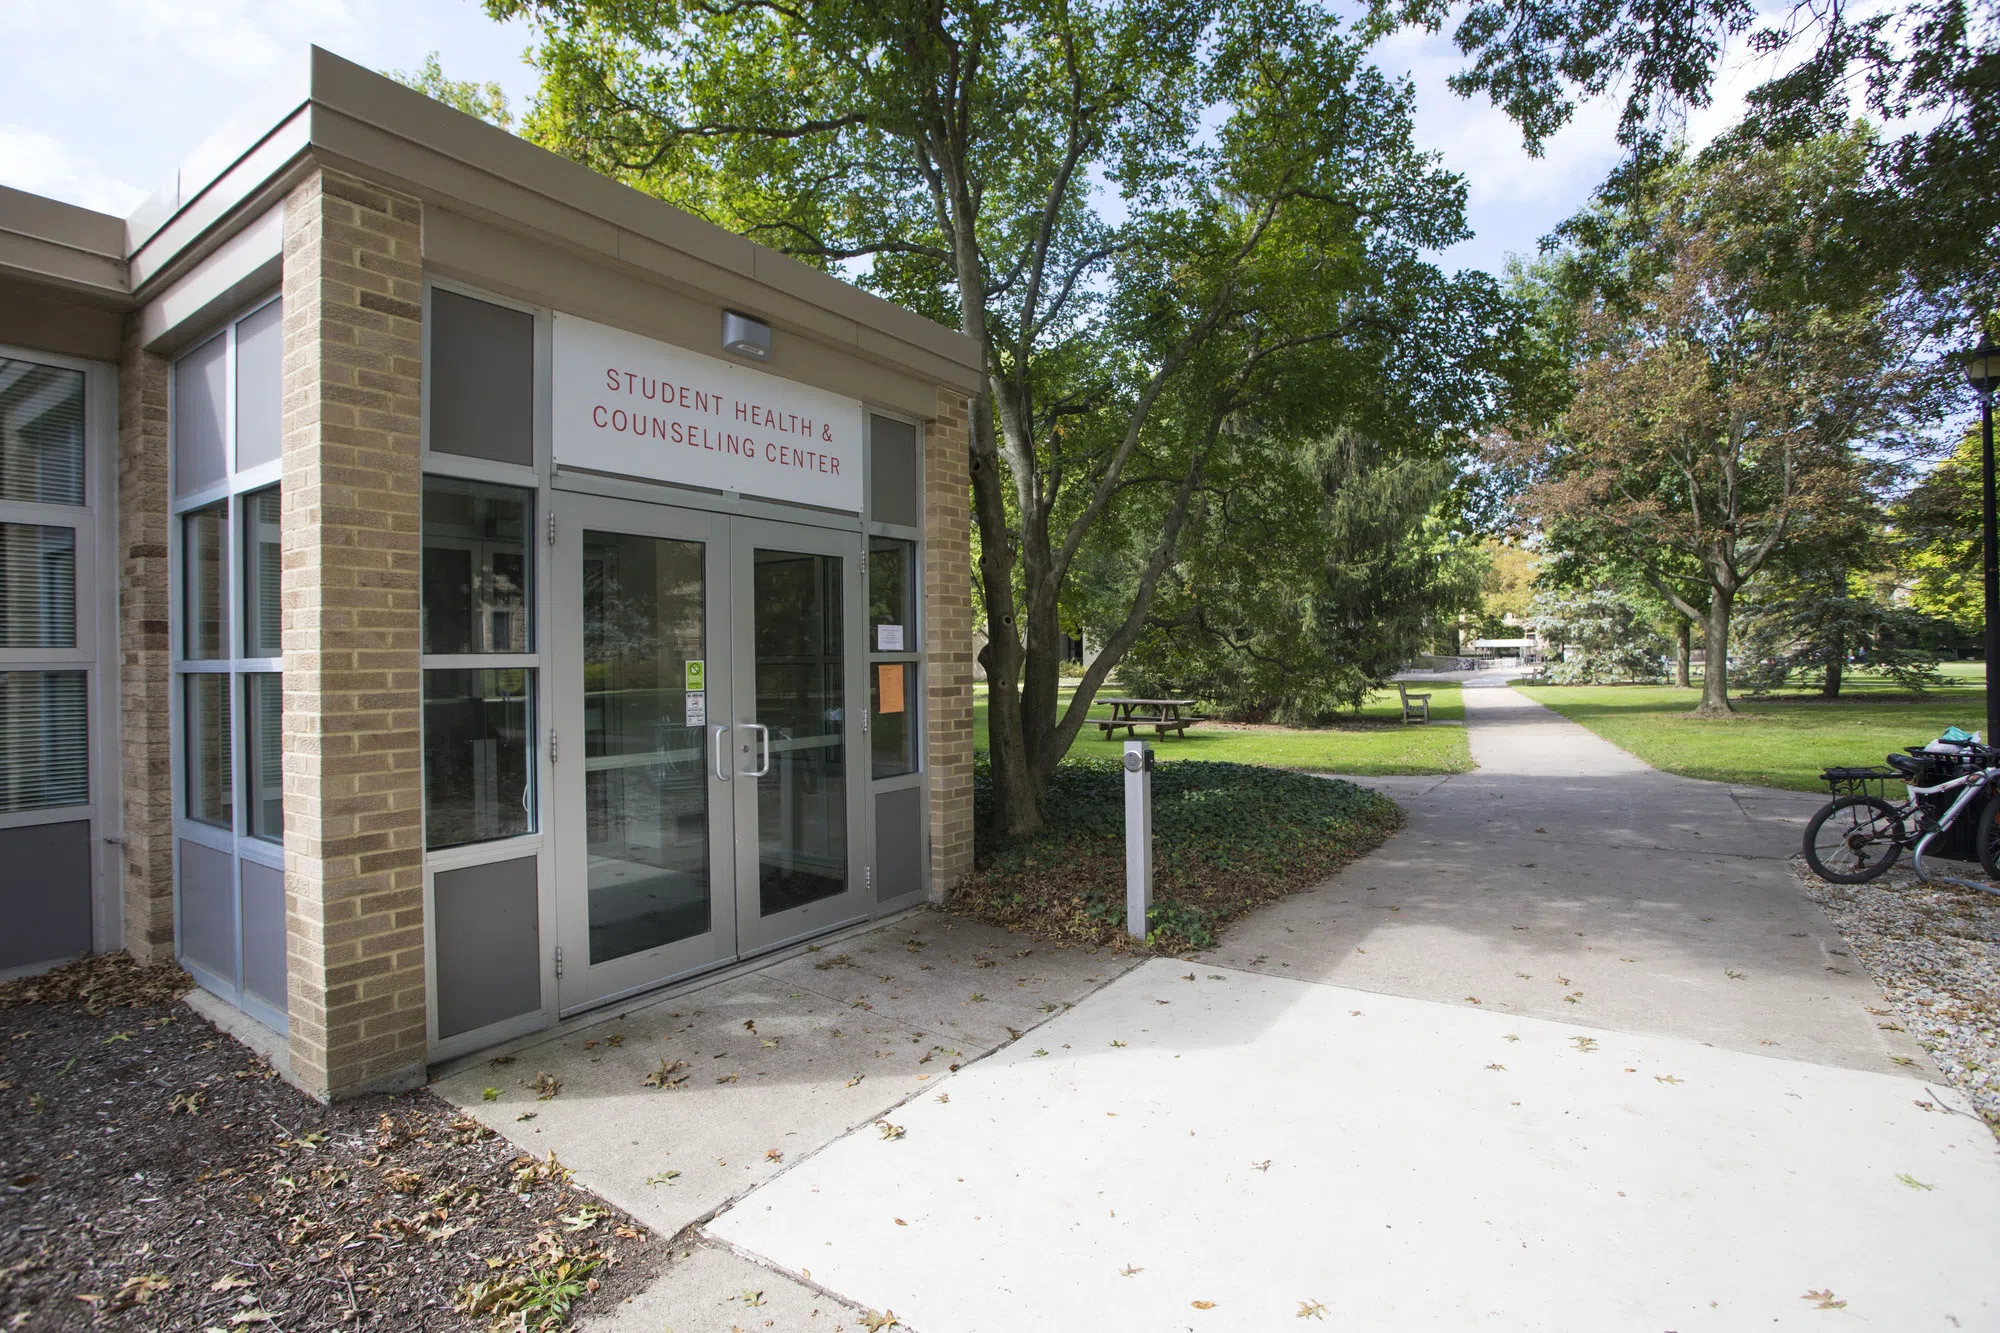 A gray brick building with the sign 'Student Health and Counseling Center' is where students can find mental and physical health support.